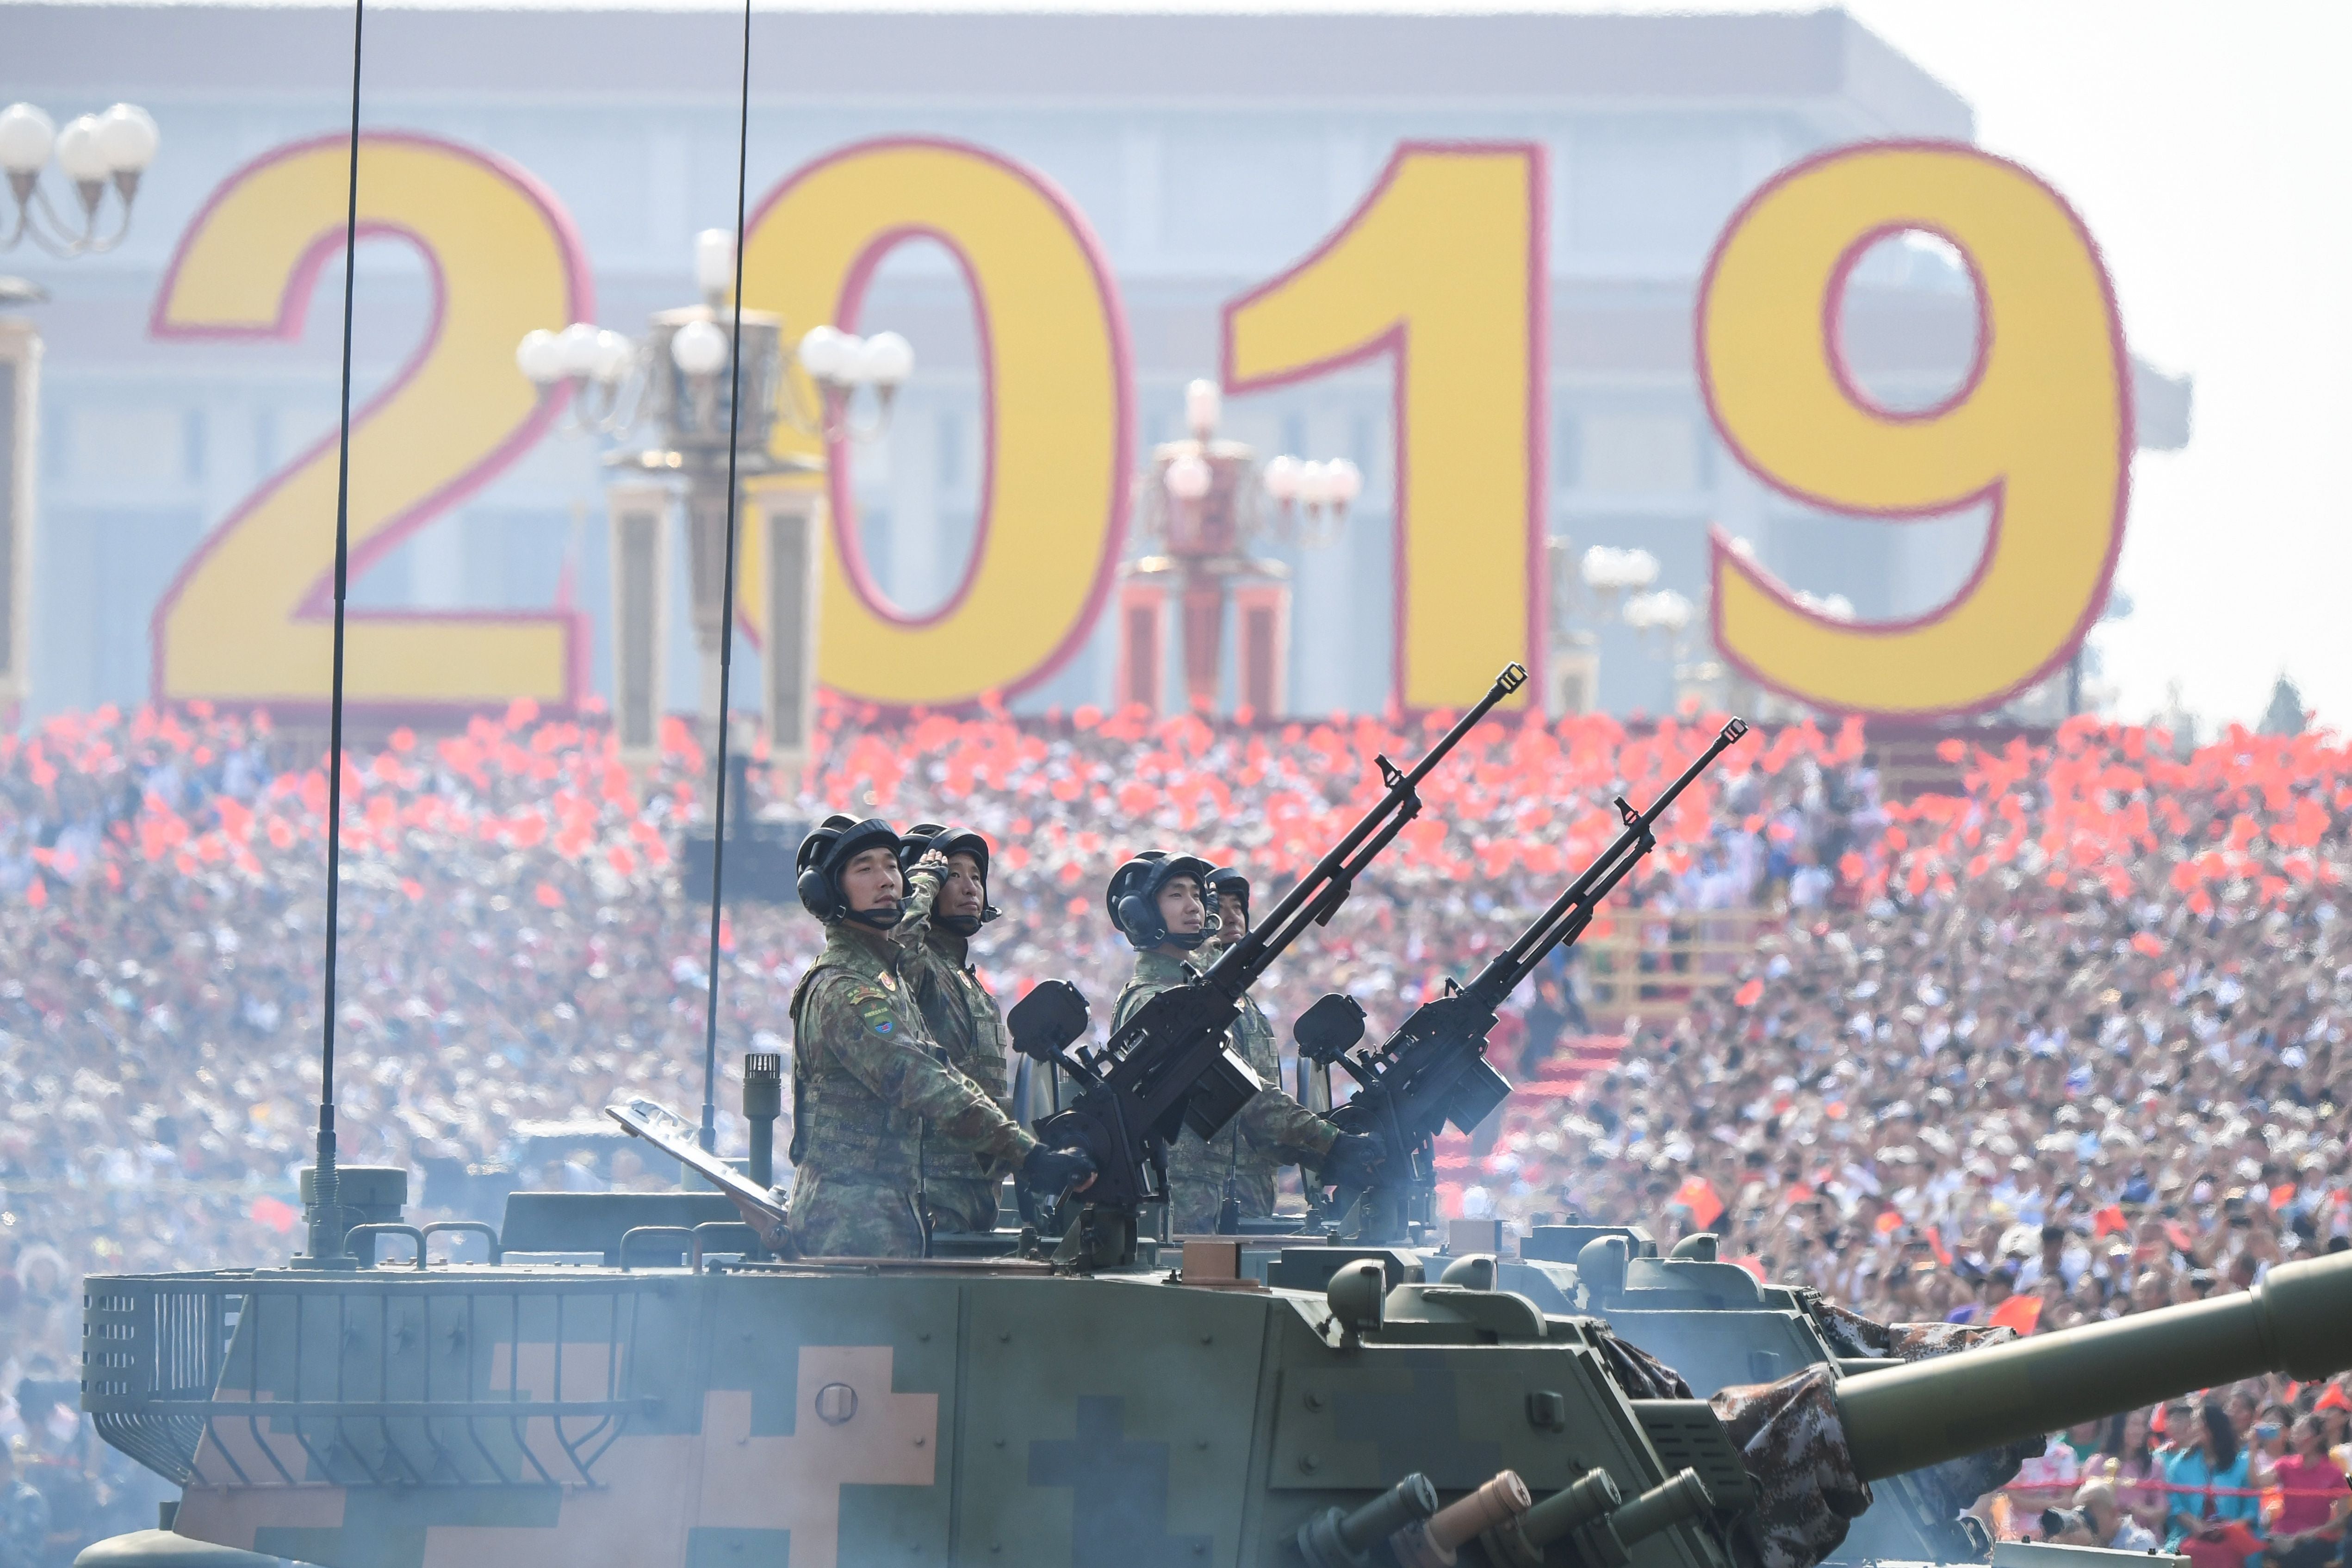 Military vehicles take part in a military parade at Tiananmen Square to mark the 70th anniversary of the founding of the Peoples Republic of China in October 2019